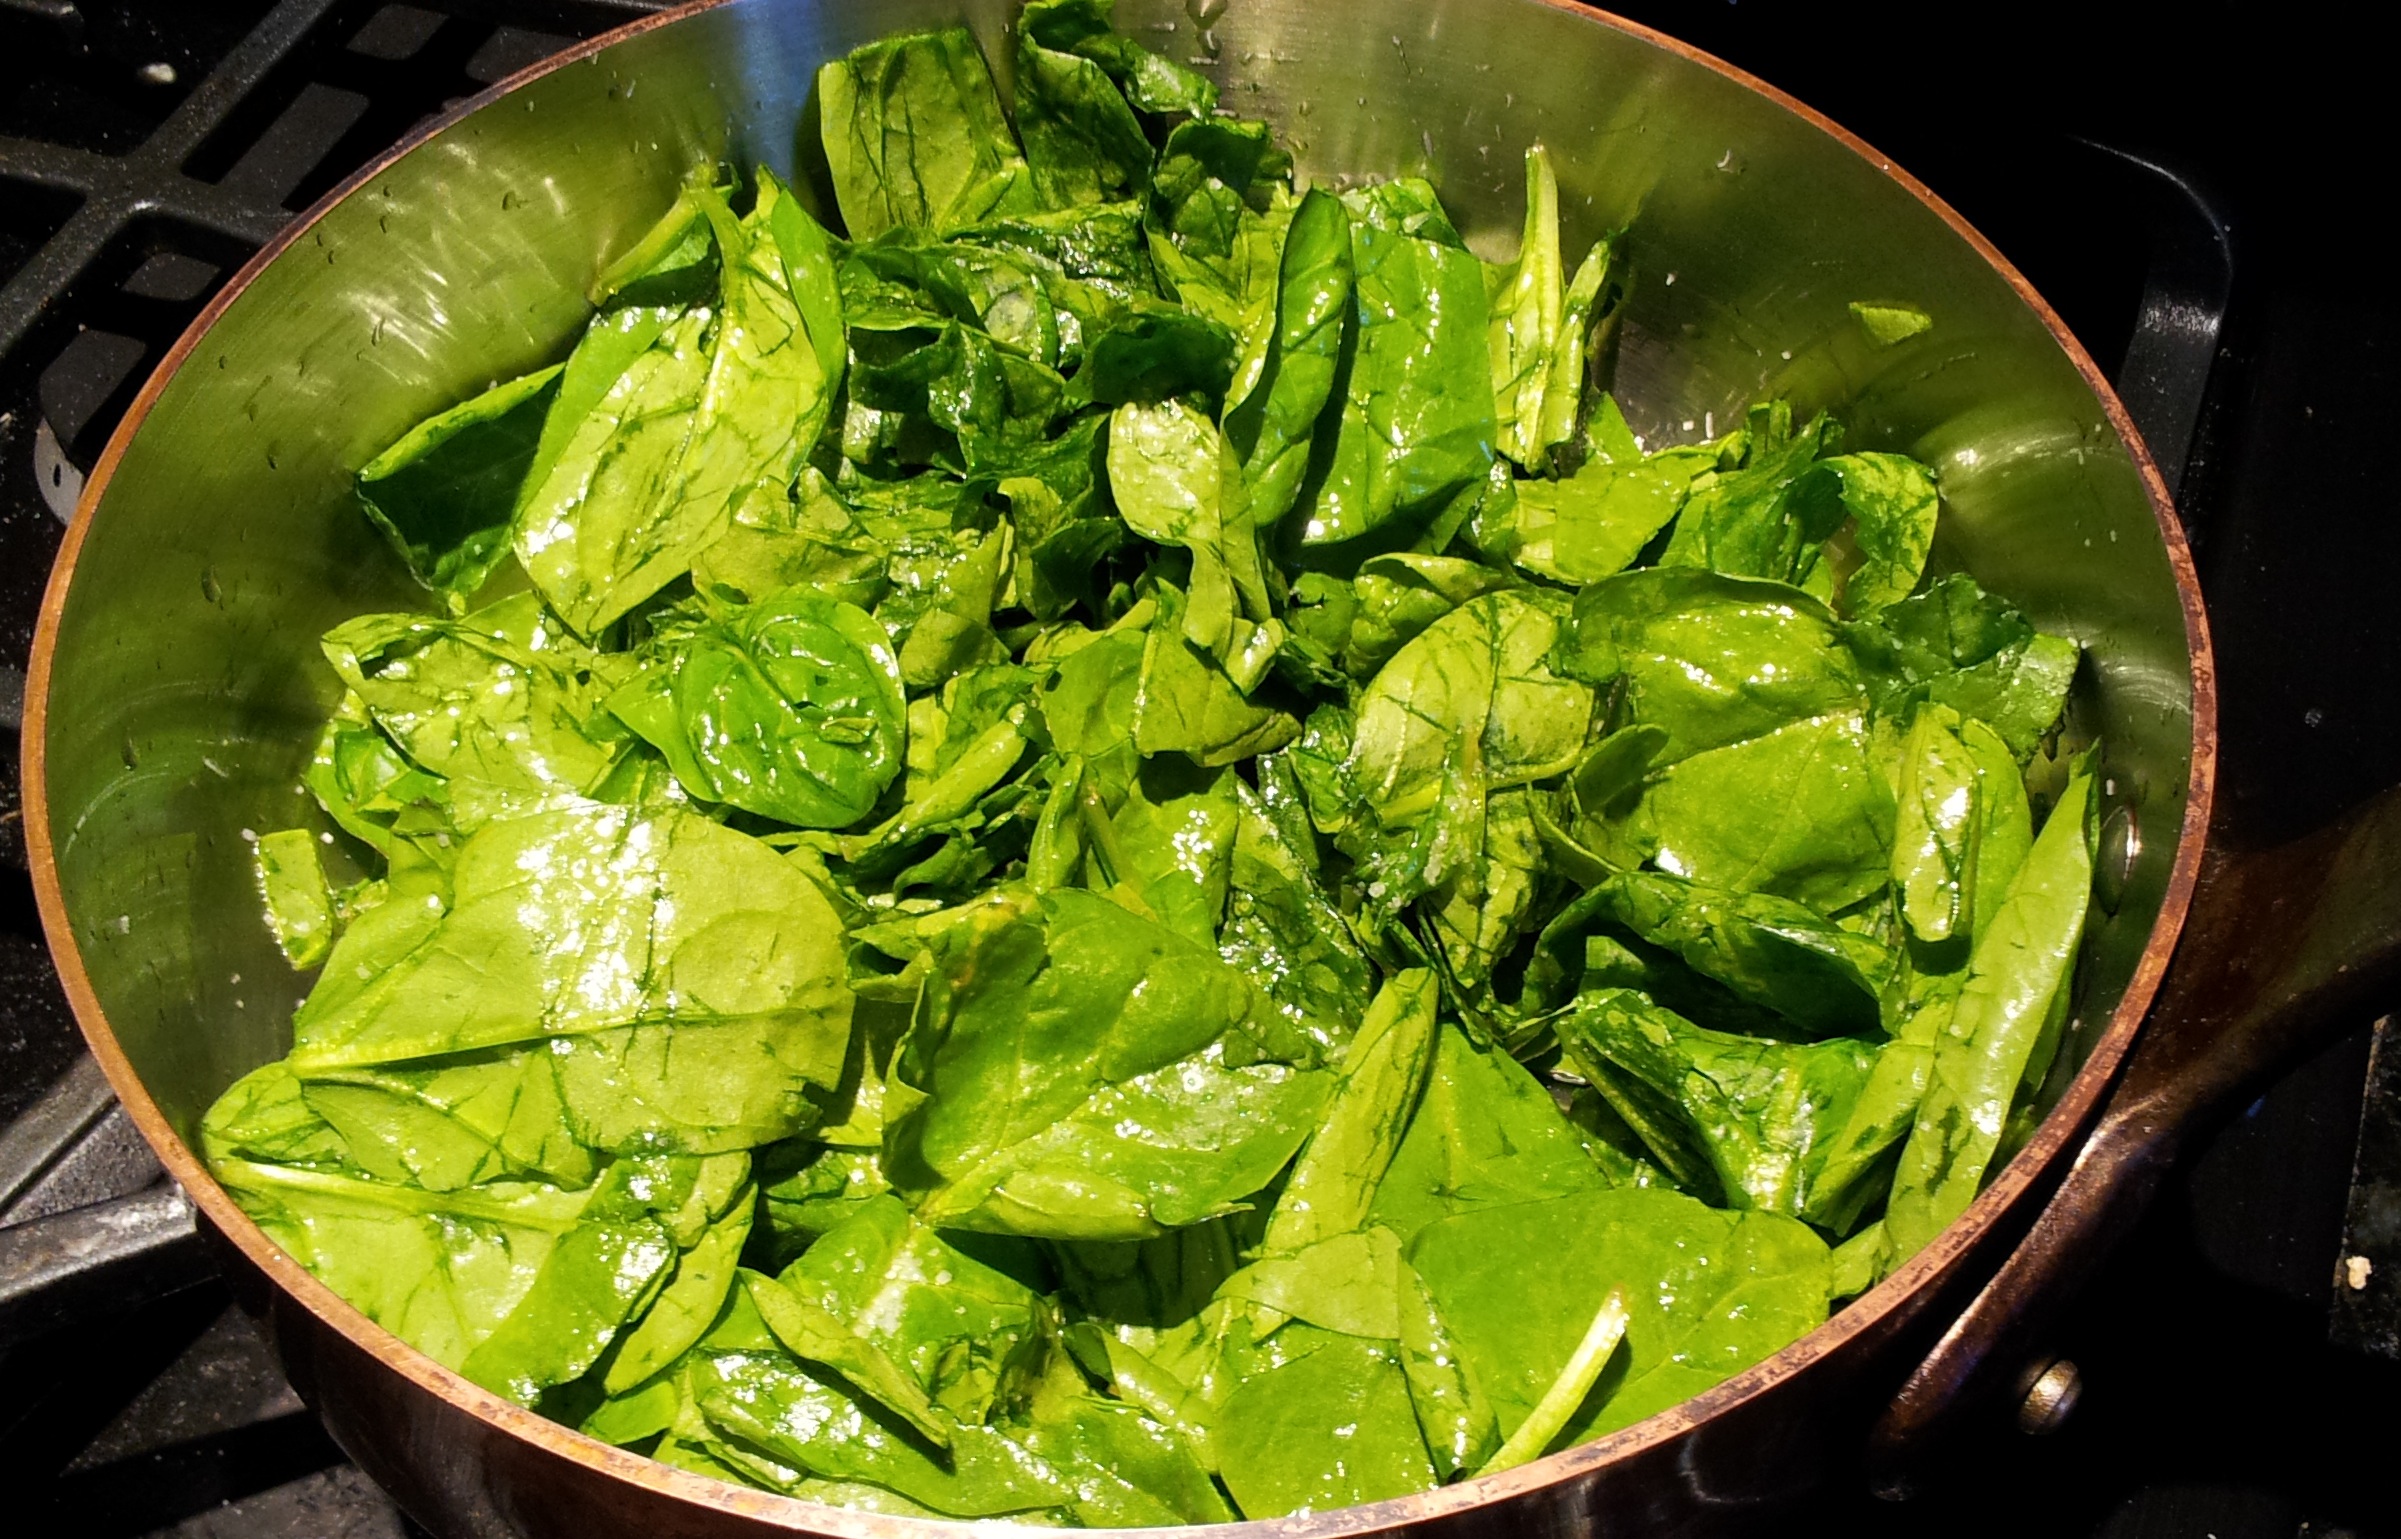 Wilting Spinach for Spinach Pasta